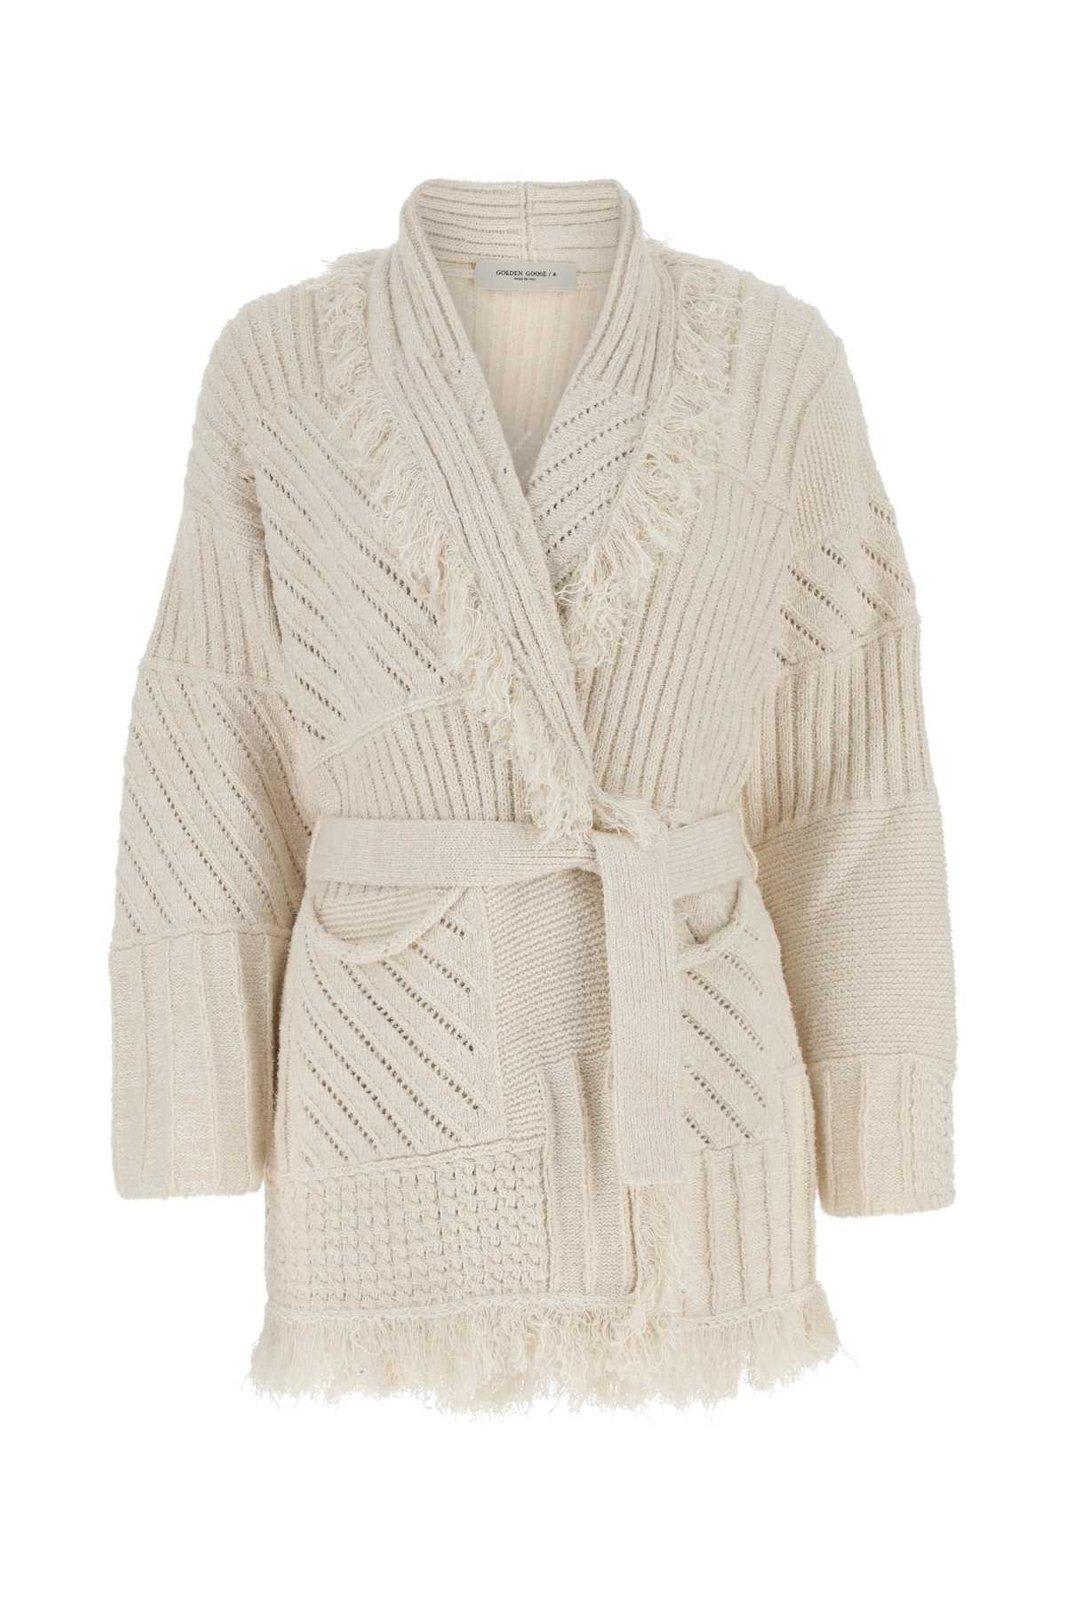 GOLDEN GOOSE TIED WAIST KNITTED CARDIGAN